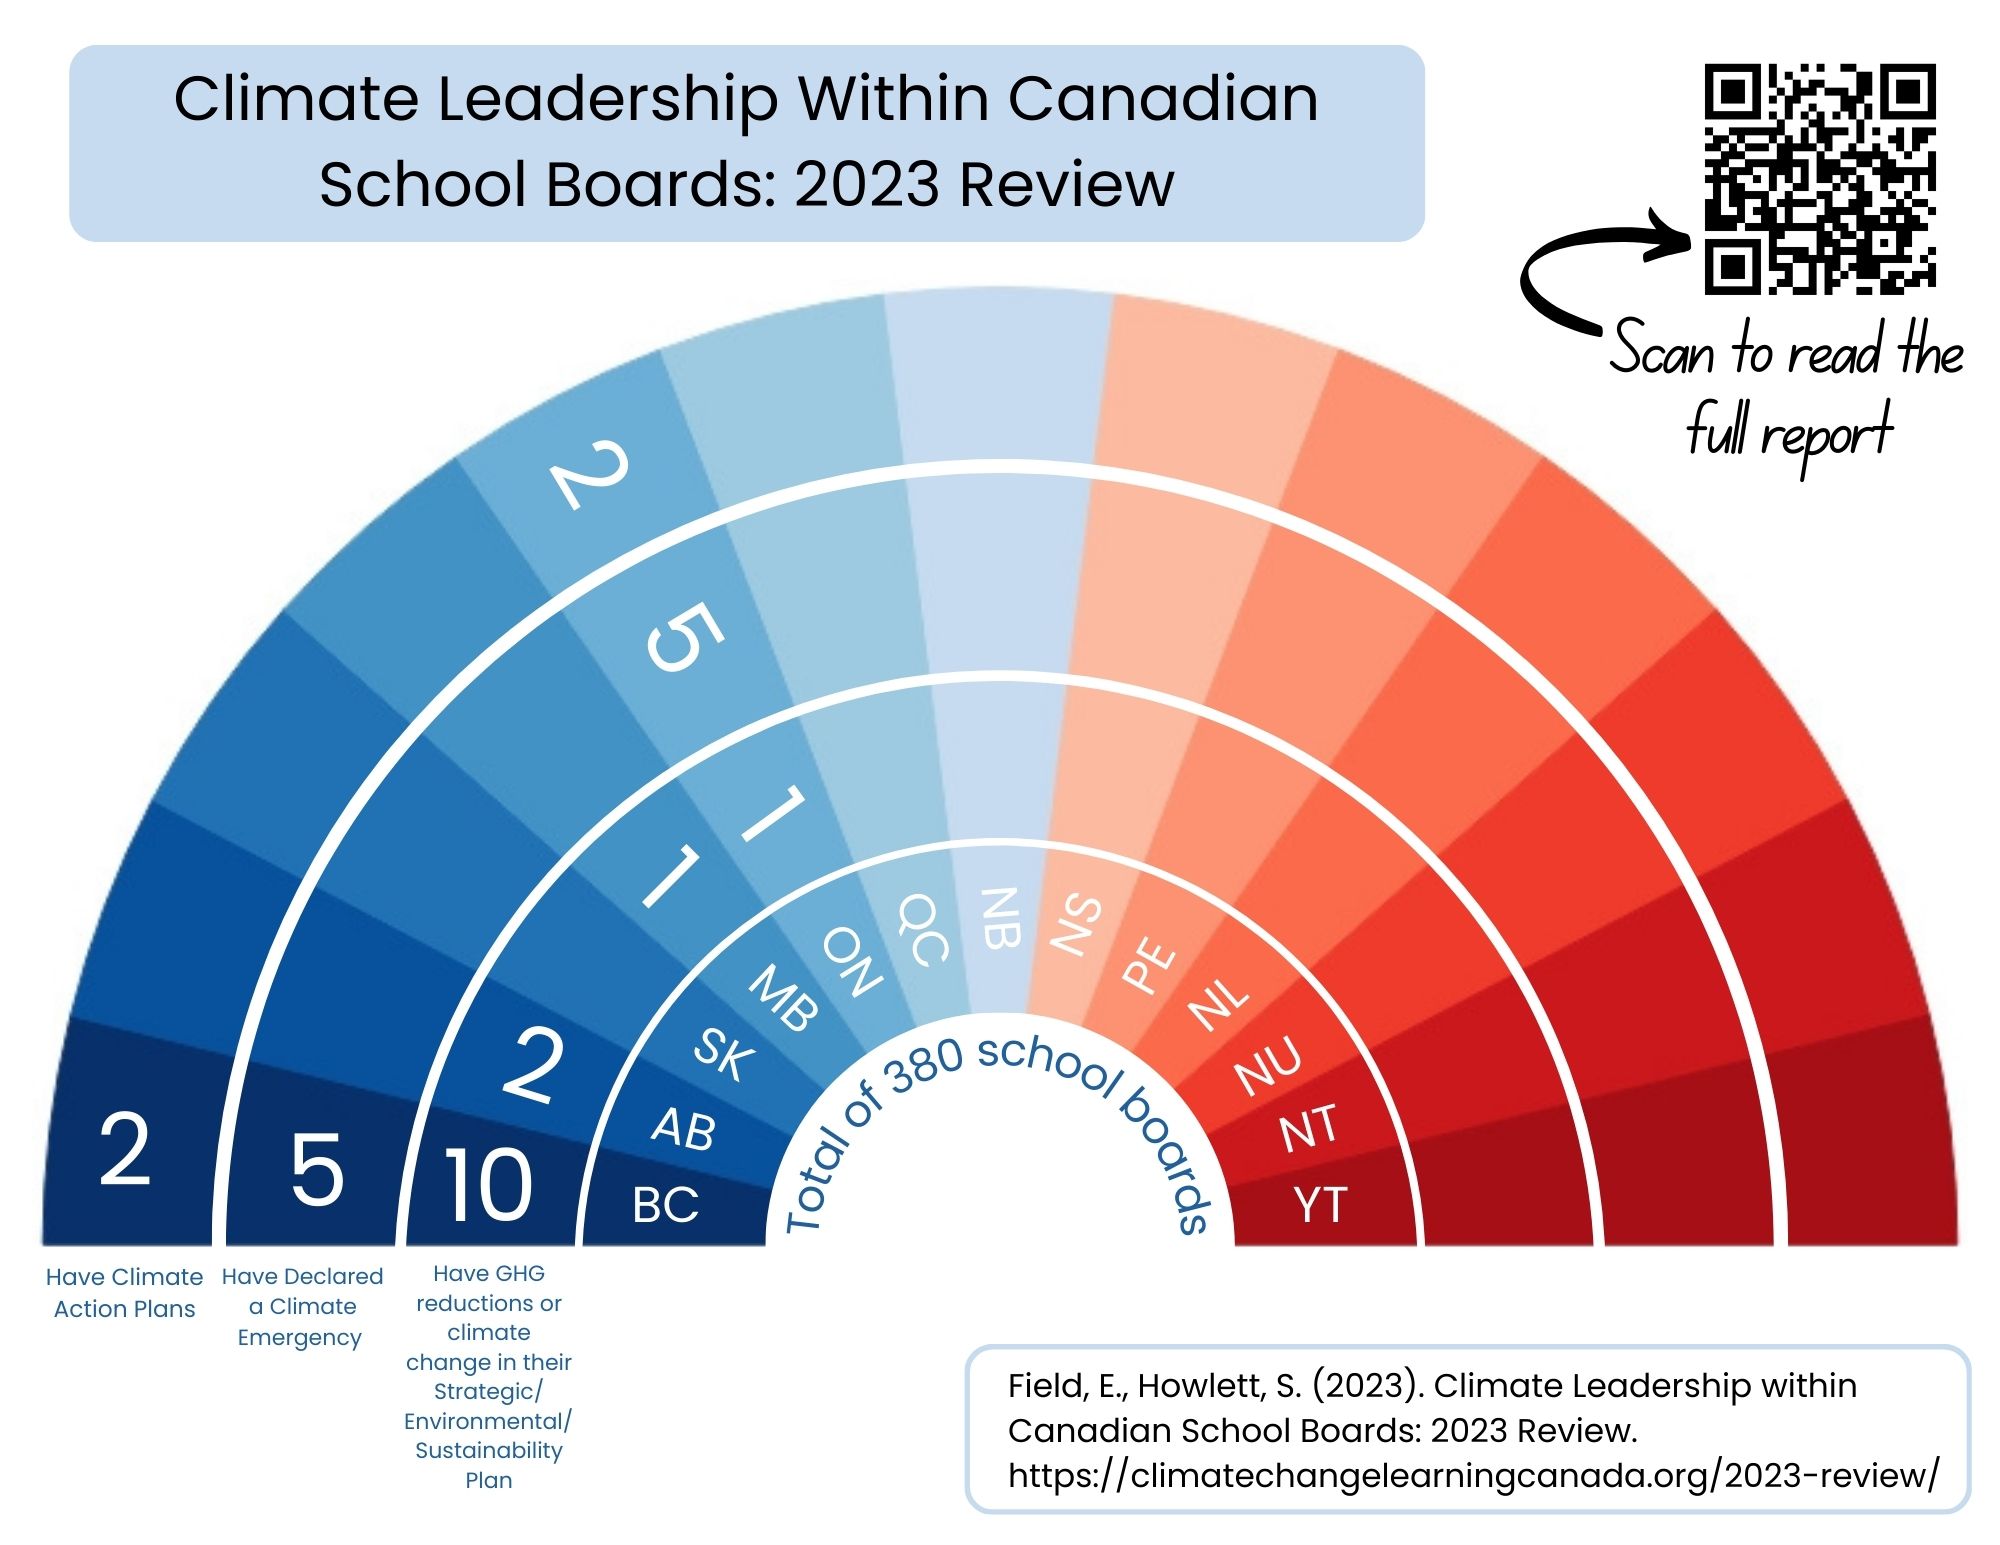 Climate Leadership Within School Boards chart